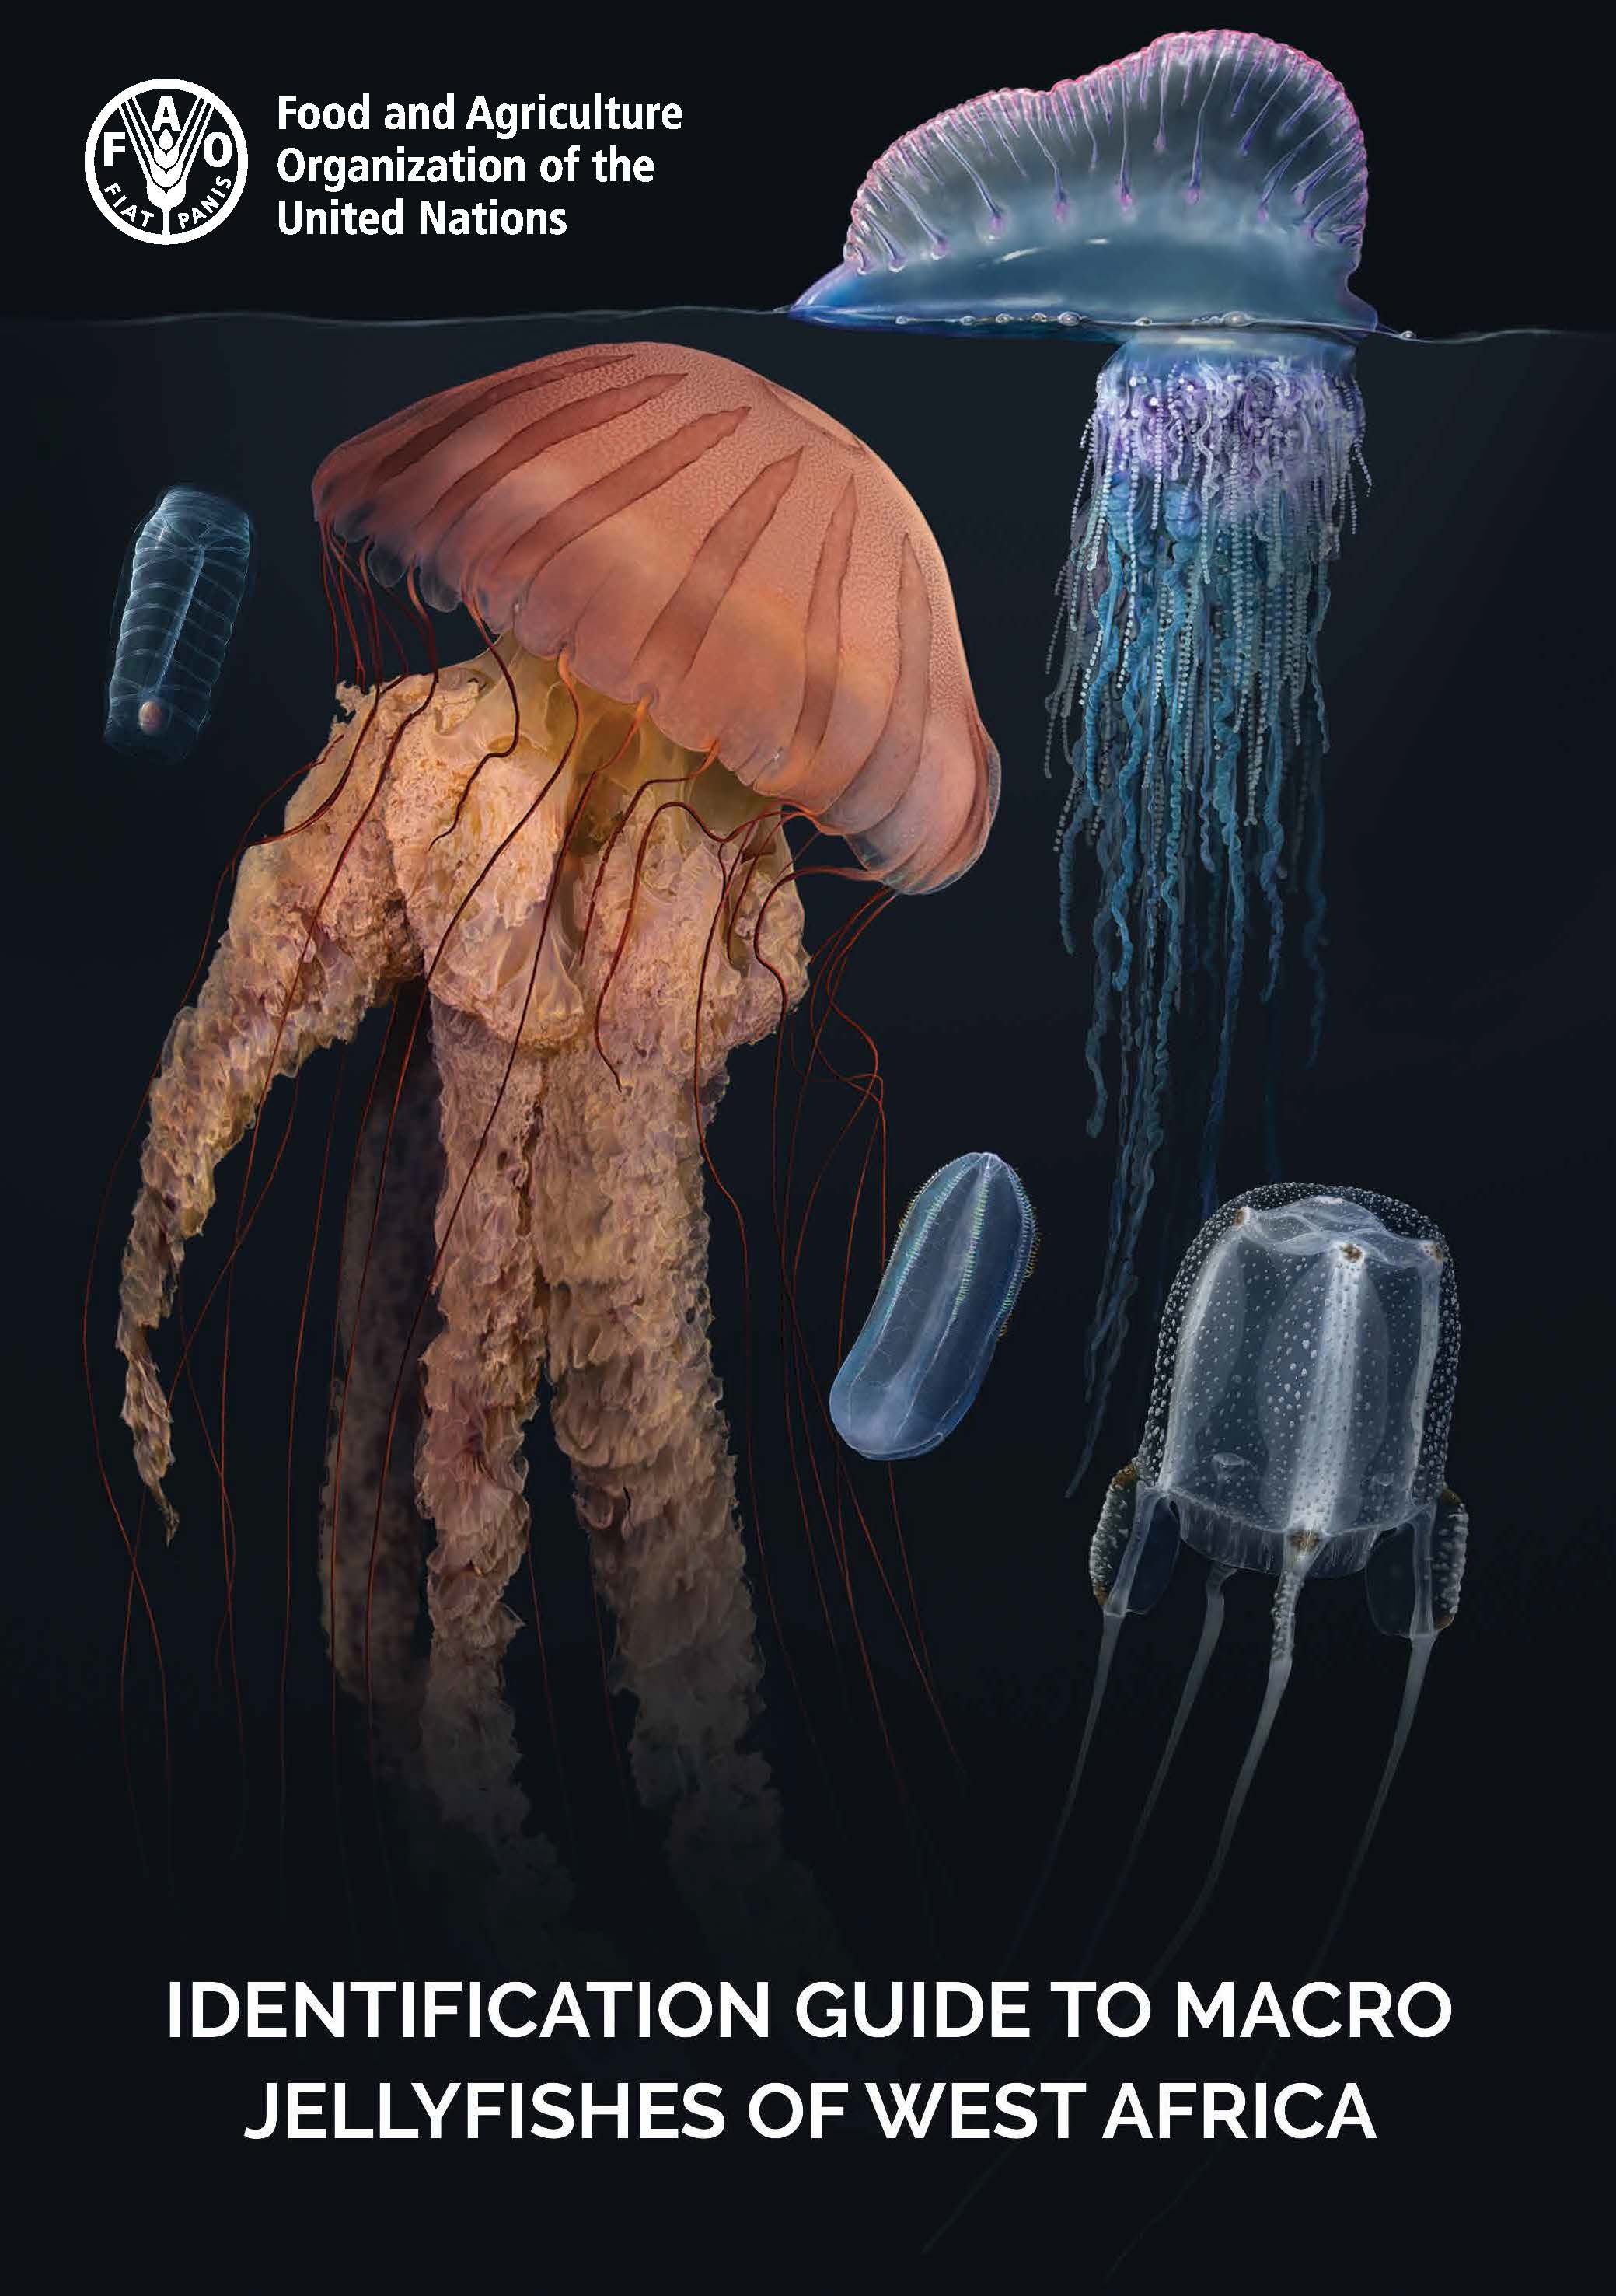 Nick Bezio is co-author and scientific illustrator of the Identification Guide to Macro Jellyfishes of West Africa, published this year by the Food and Agriculture Organization of the United Nations. Click image to download hi-res version.